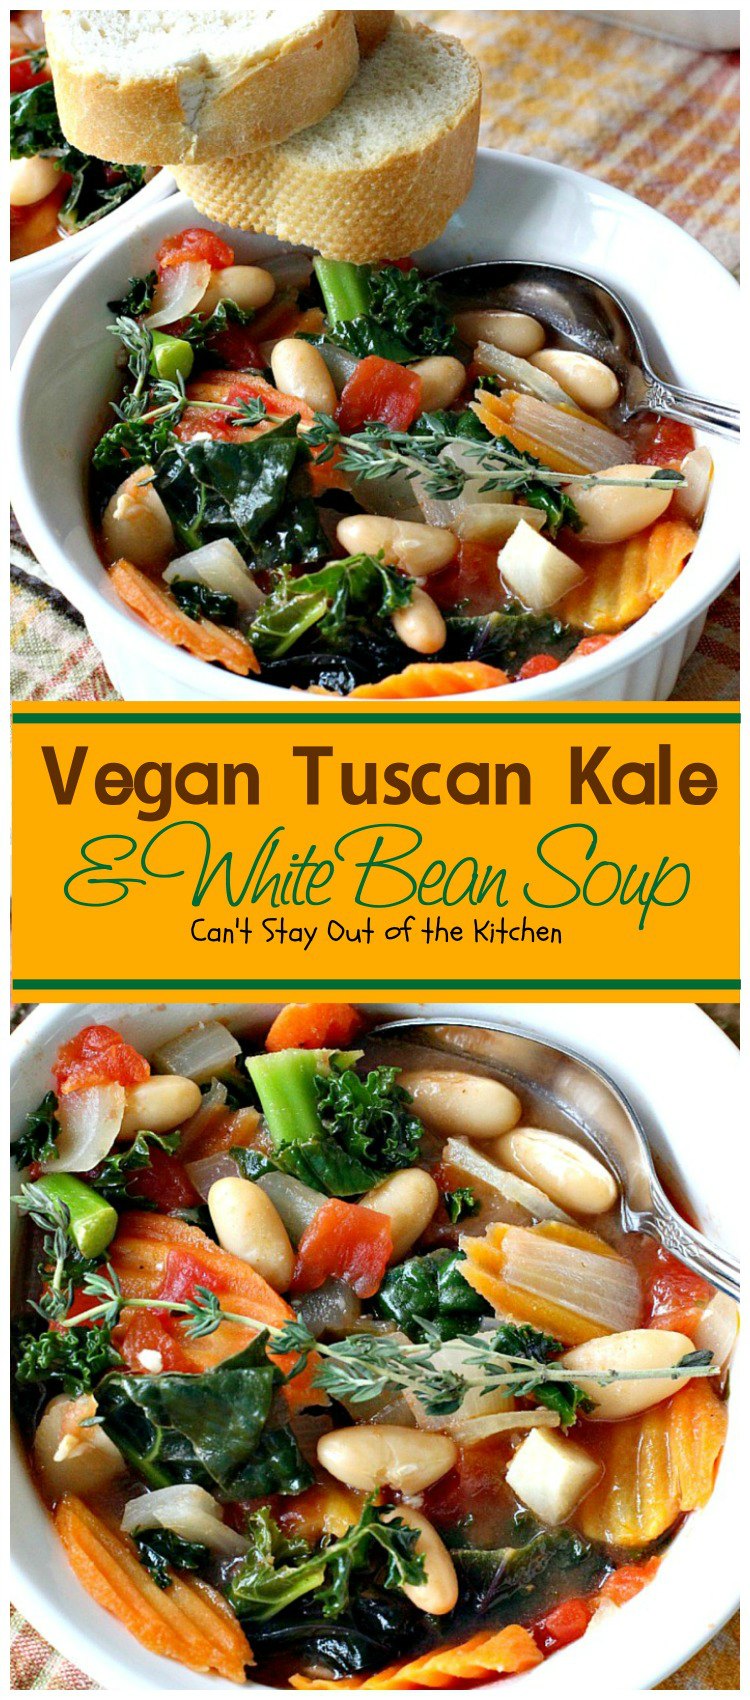 Vegan Tuscan Kale & White Bean Soup | Can't Stay Out of the Kitchen